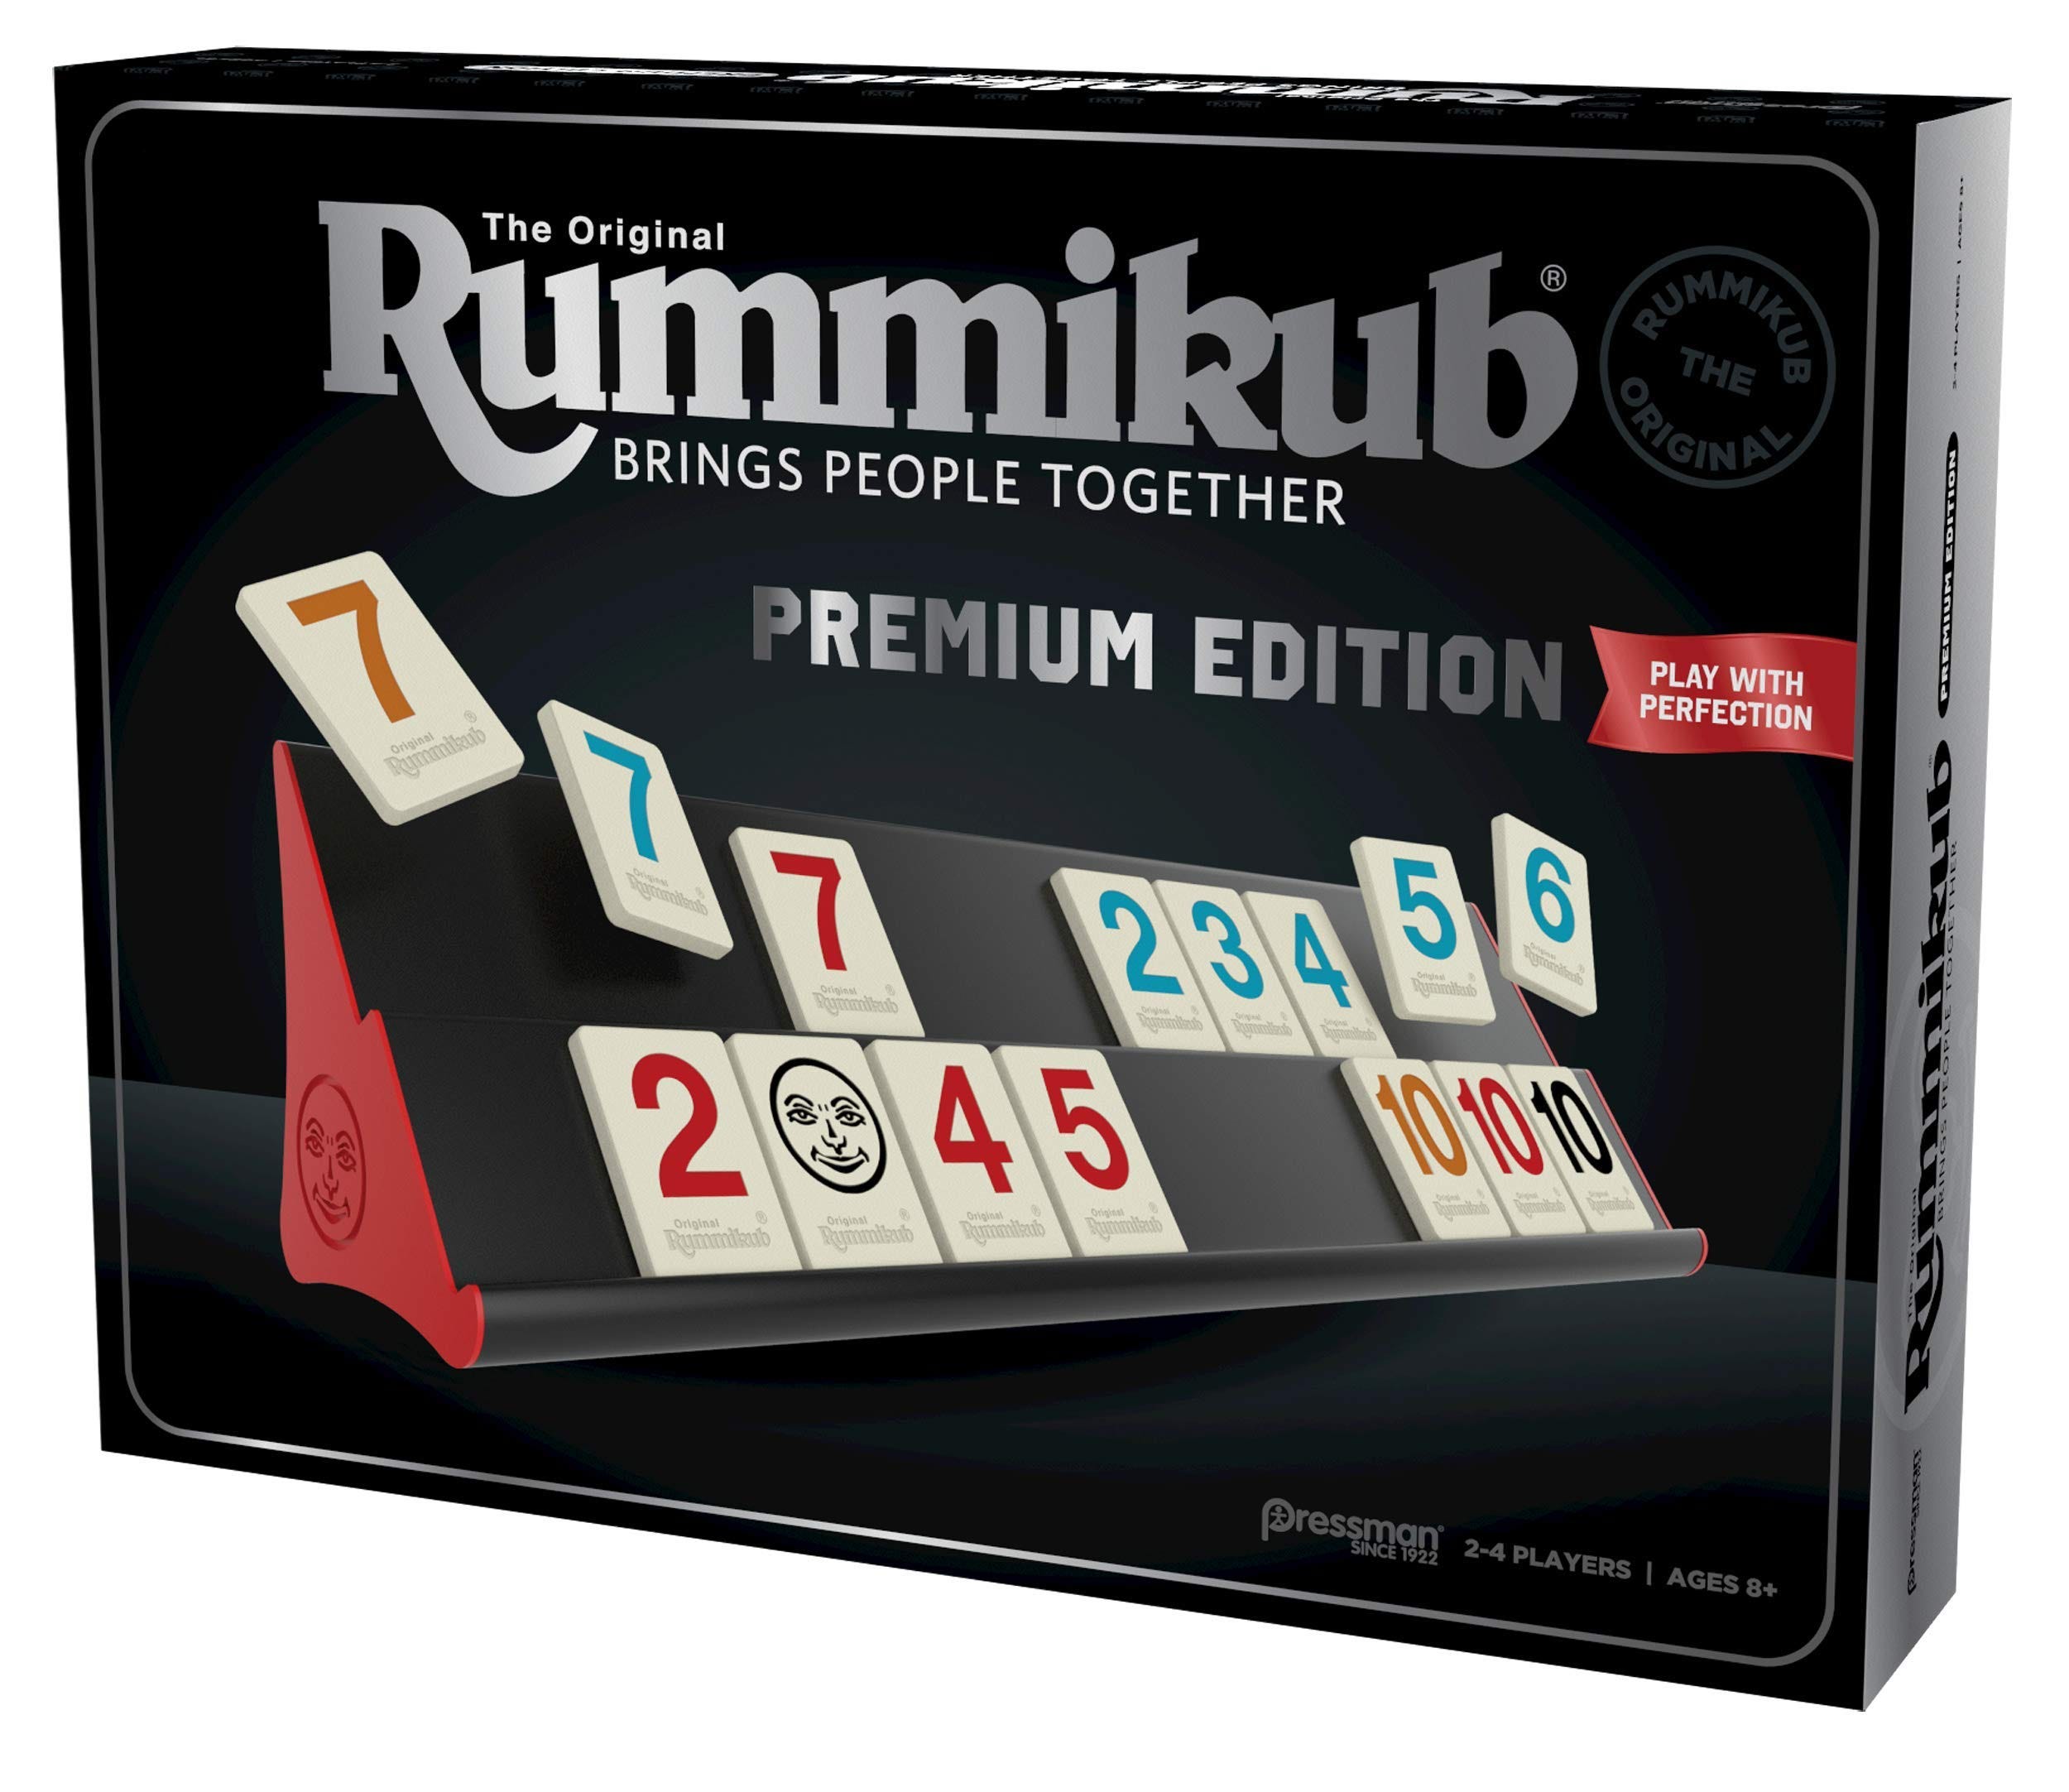 Rummikub on the Go Travel Case Great Gift Fast Moving Changes